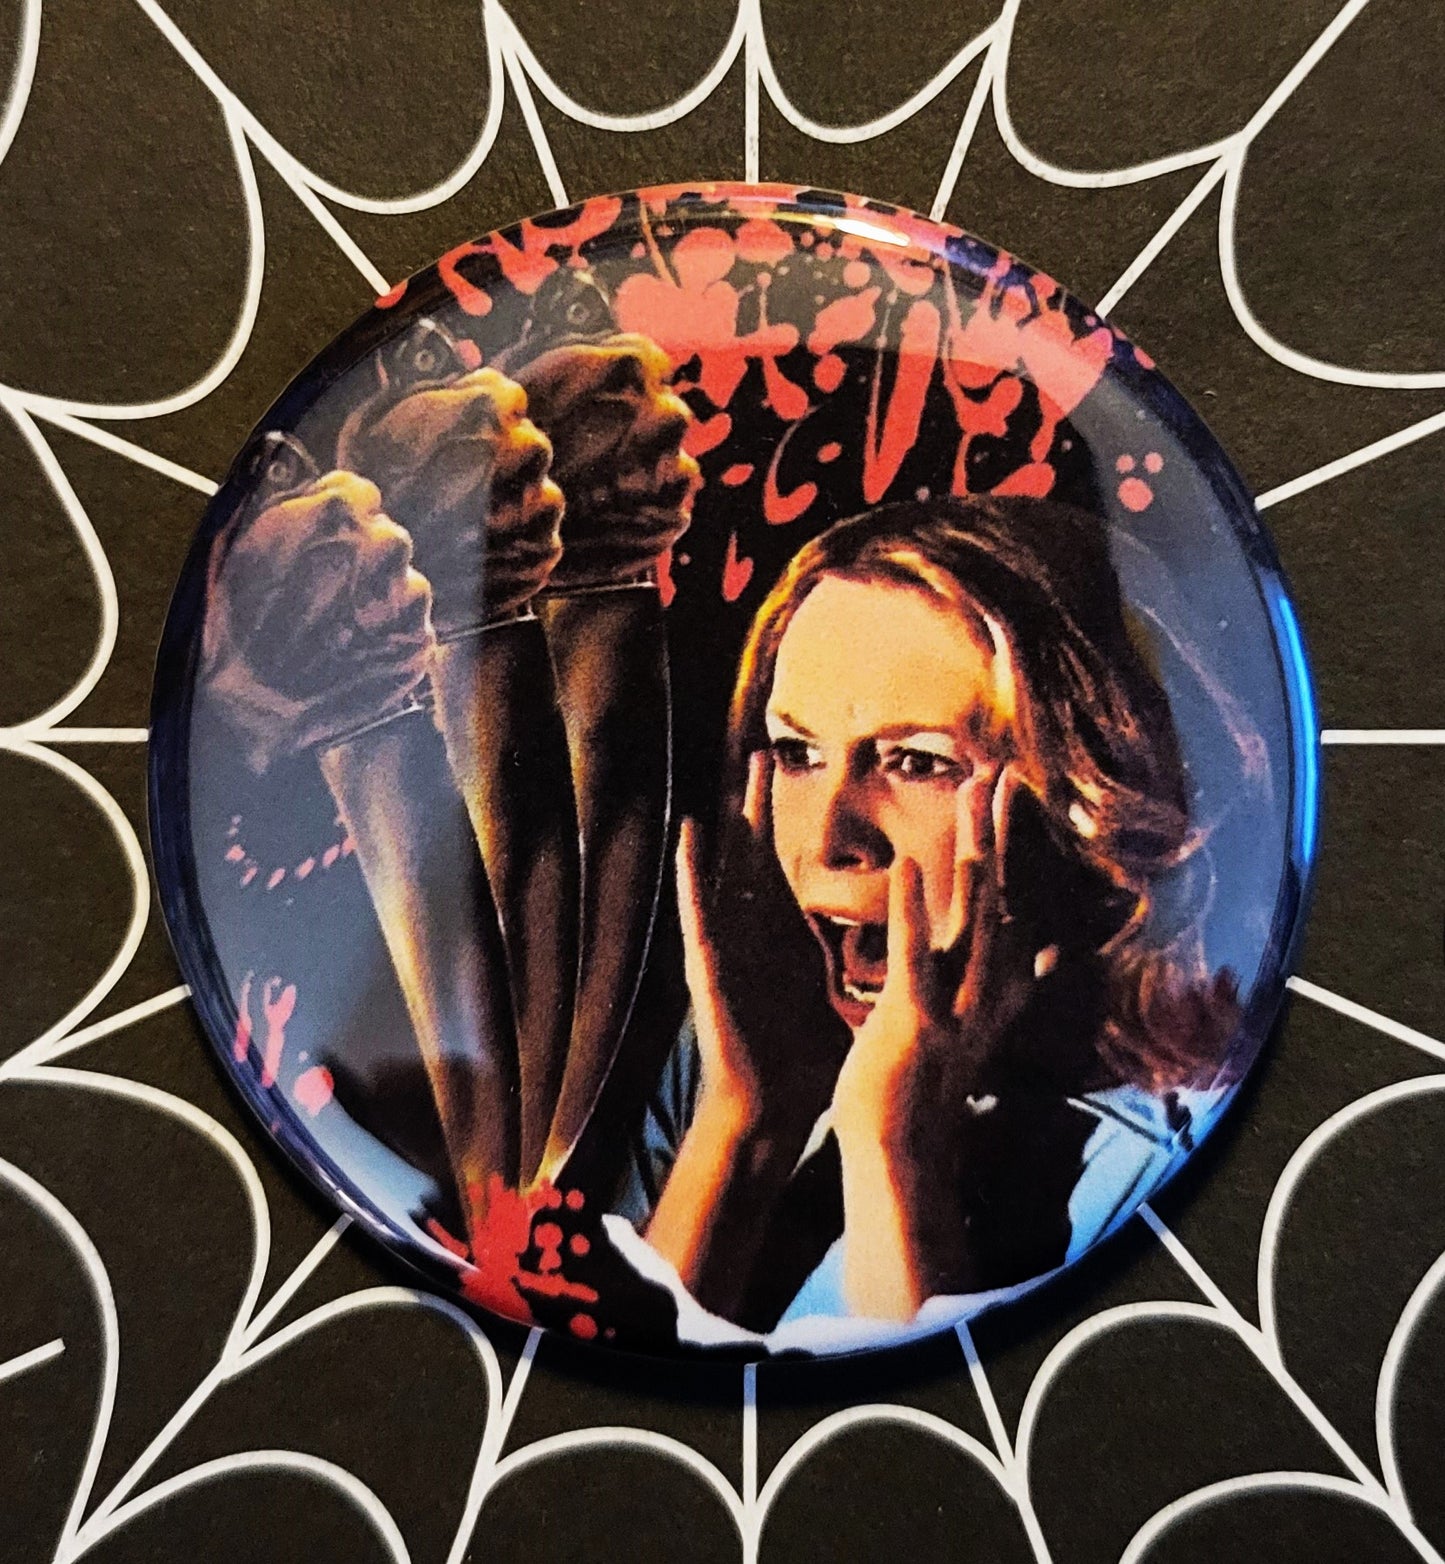 Horror Movie pinback Buttons & Bottle Openers. set 1